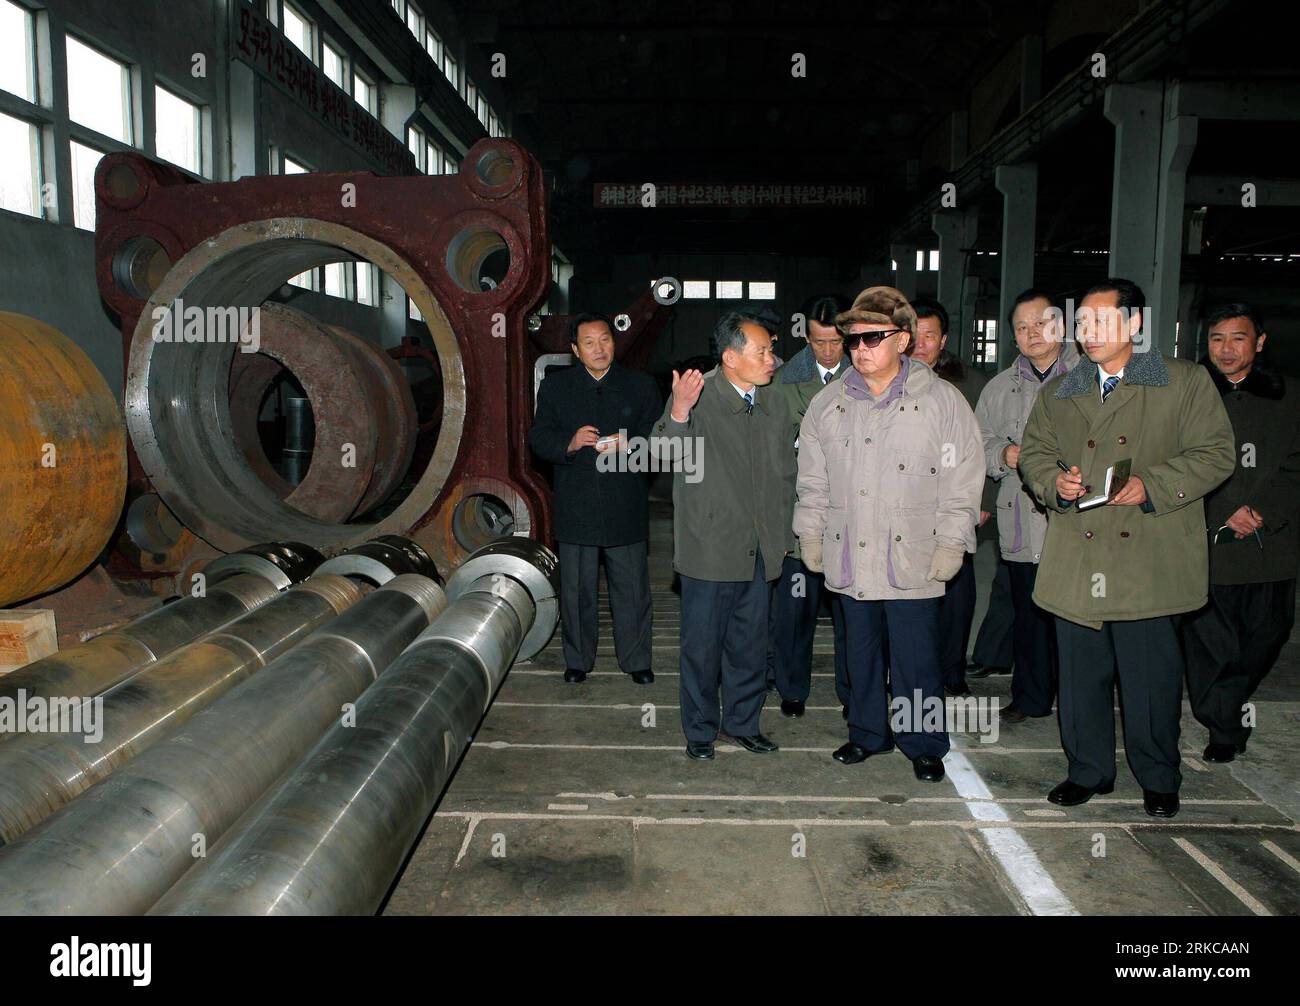 Bildnummer: 54712302  Datum: 06.12.2010  Copyright: imago/Xinhua (101206) -- PYONGYANG,, Dec. 6, 2010 (Xinhua) -- This photo released by the official KCNA news agency on Dec. 6, 2010, shows Kim Jong Il (C), top leader of the Democratic People s Republic of Korea (DPRK), inspects the Kim Chaek Iron and Steel Complex, which established an iron making method without use of cokes and a new iron production system with lignite. (Xinhua/KNCA) (wh) DPRK-KIM JONG IL-INSPECTIONS PUBLICATIONxNOTxINxCHN People Politik kbdig xsk 2010 quer    Bildnummer 54712302 Date 06 12 2010 Copyright Imago XINHUA  Pyong Stock Photo